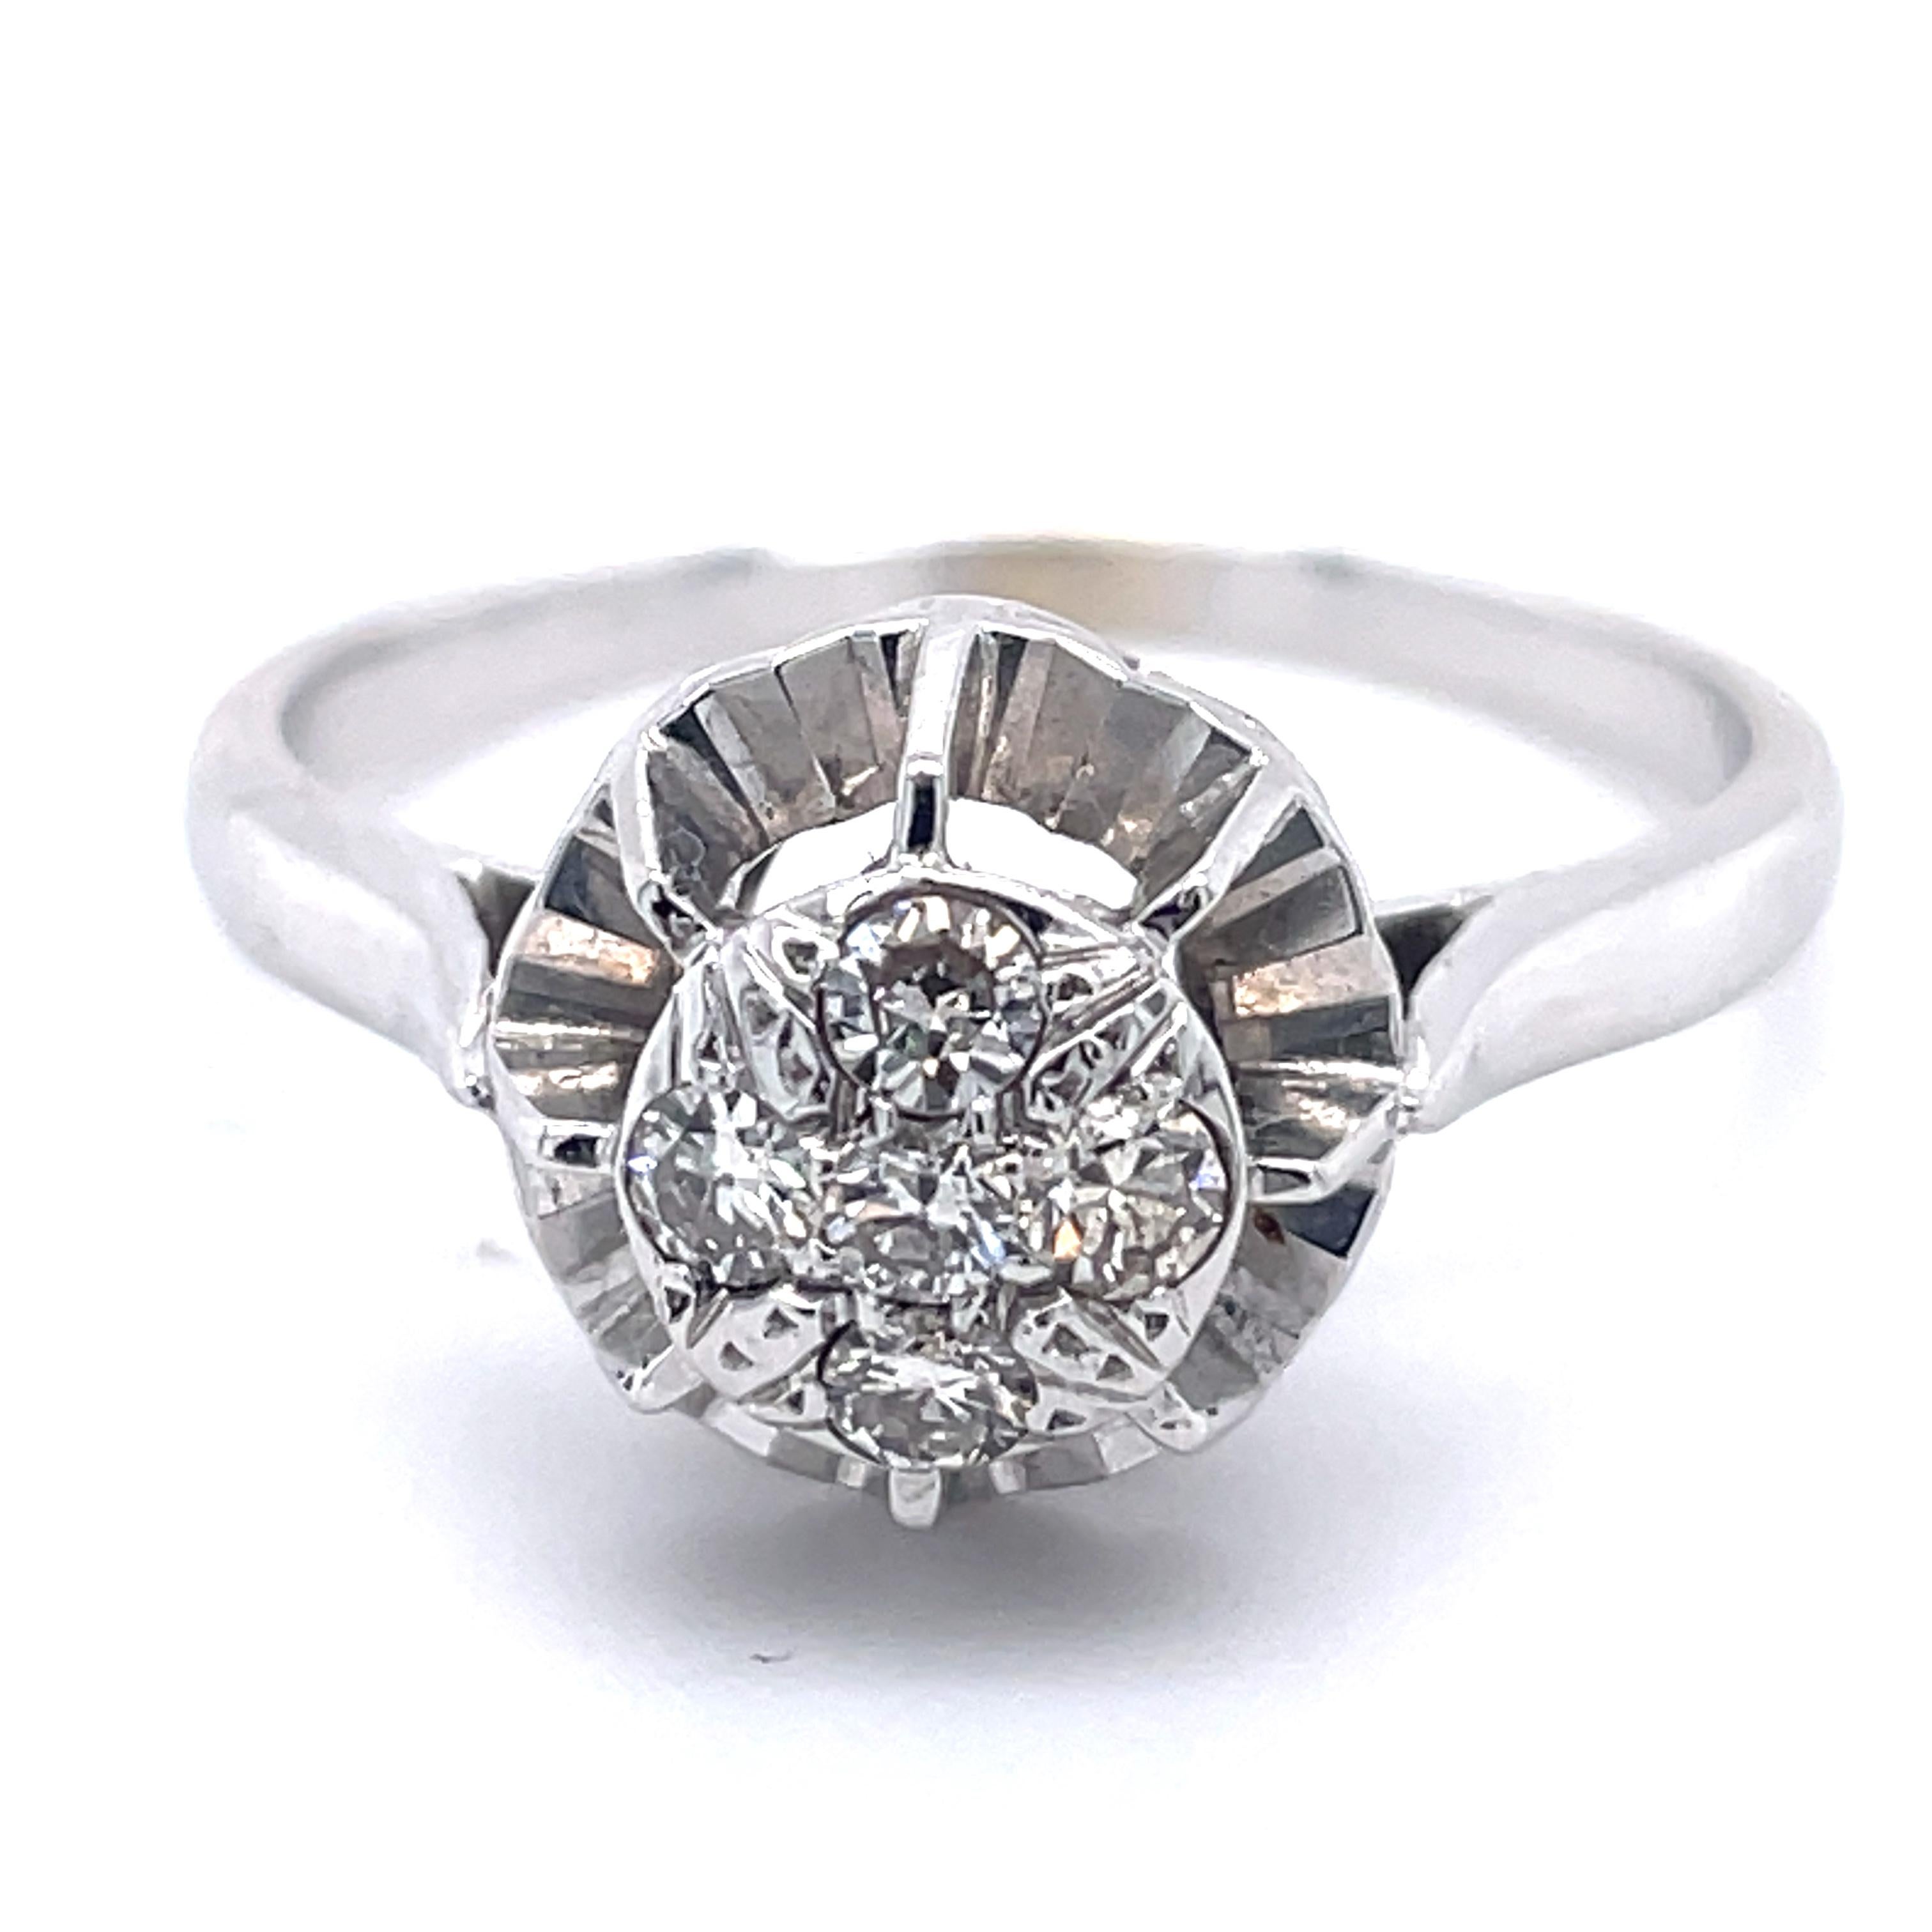 Diamond Cluster Ring, White gold 18K, 0.2ct Diamonds, Reflector Detailed Ring

Jewelry Material: White Gold 18k (the gold has been tested by a professional)
Total Carat Weight: 0.20ct (Approx.)
Total Metal Weight: 4.37g
Size: 9 US \ 18.89mm (inner